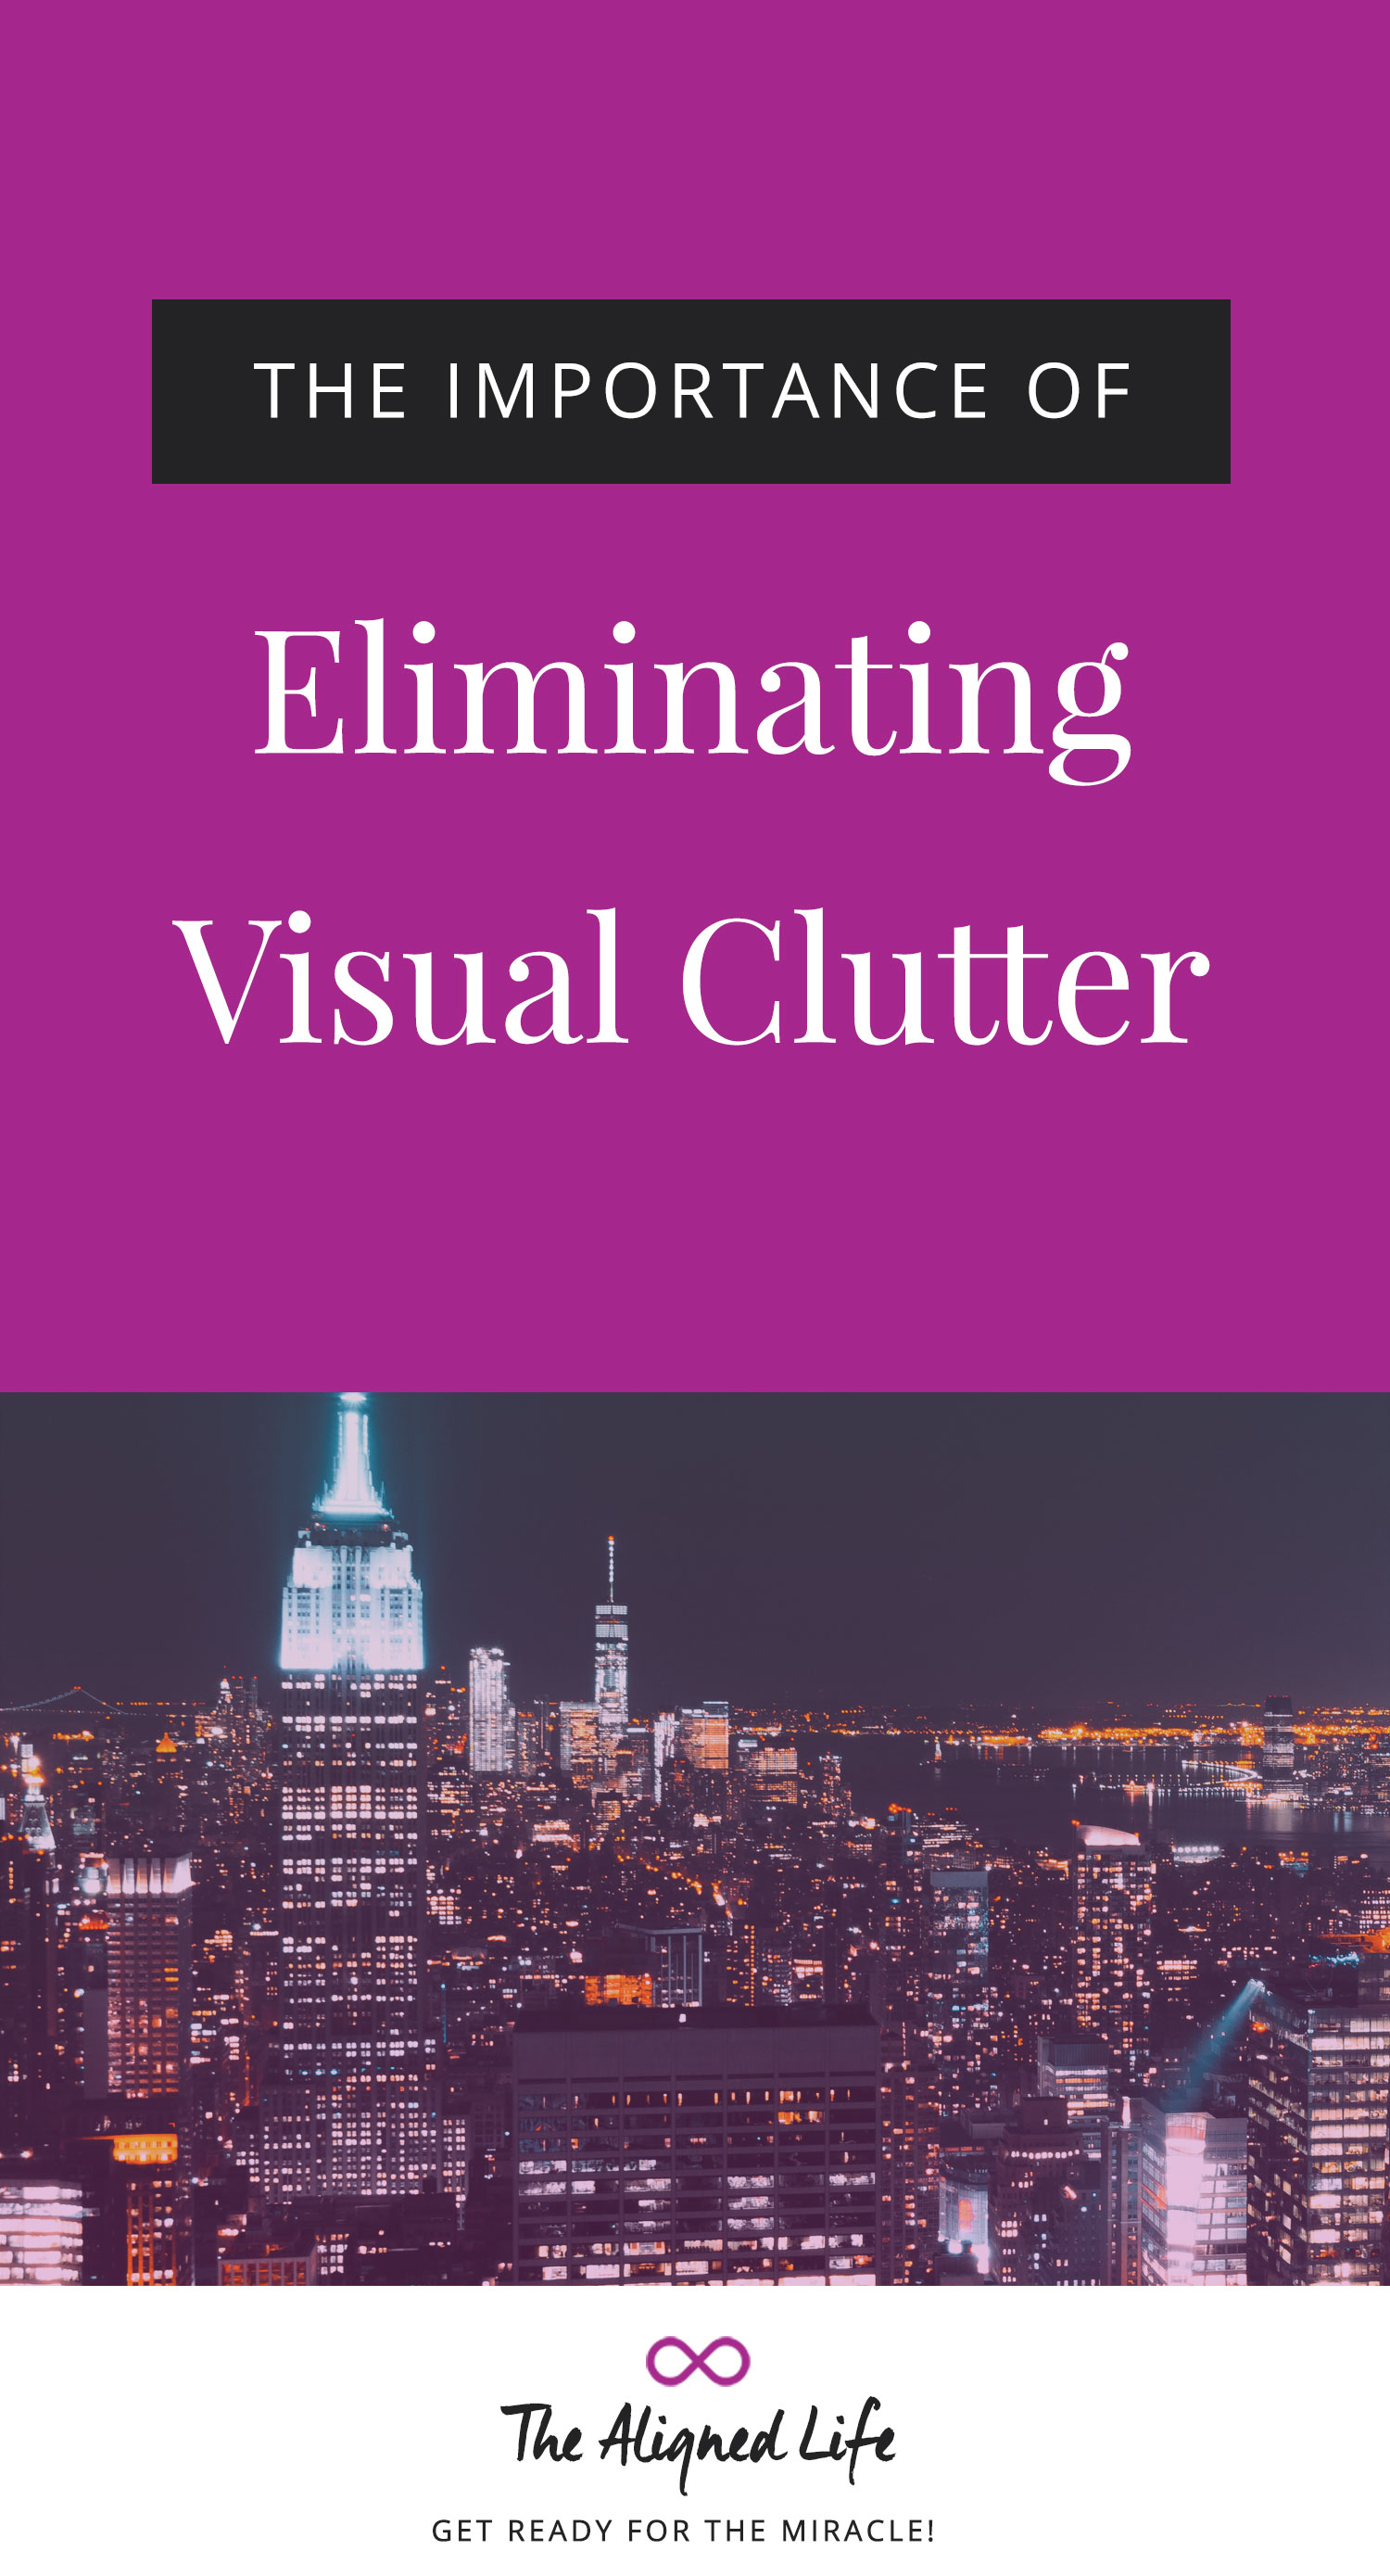 The Importance Of Eliminating Visual Clutter